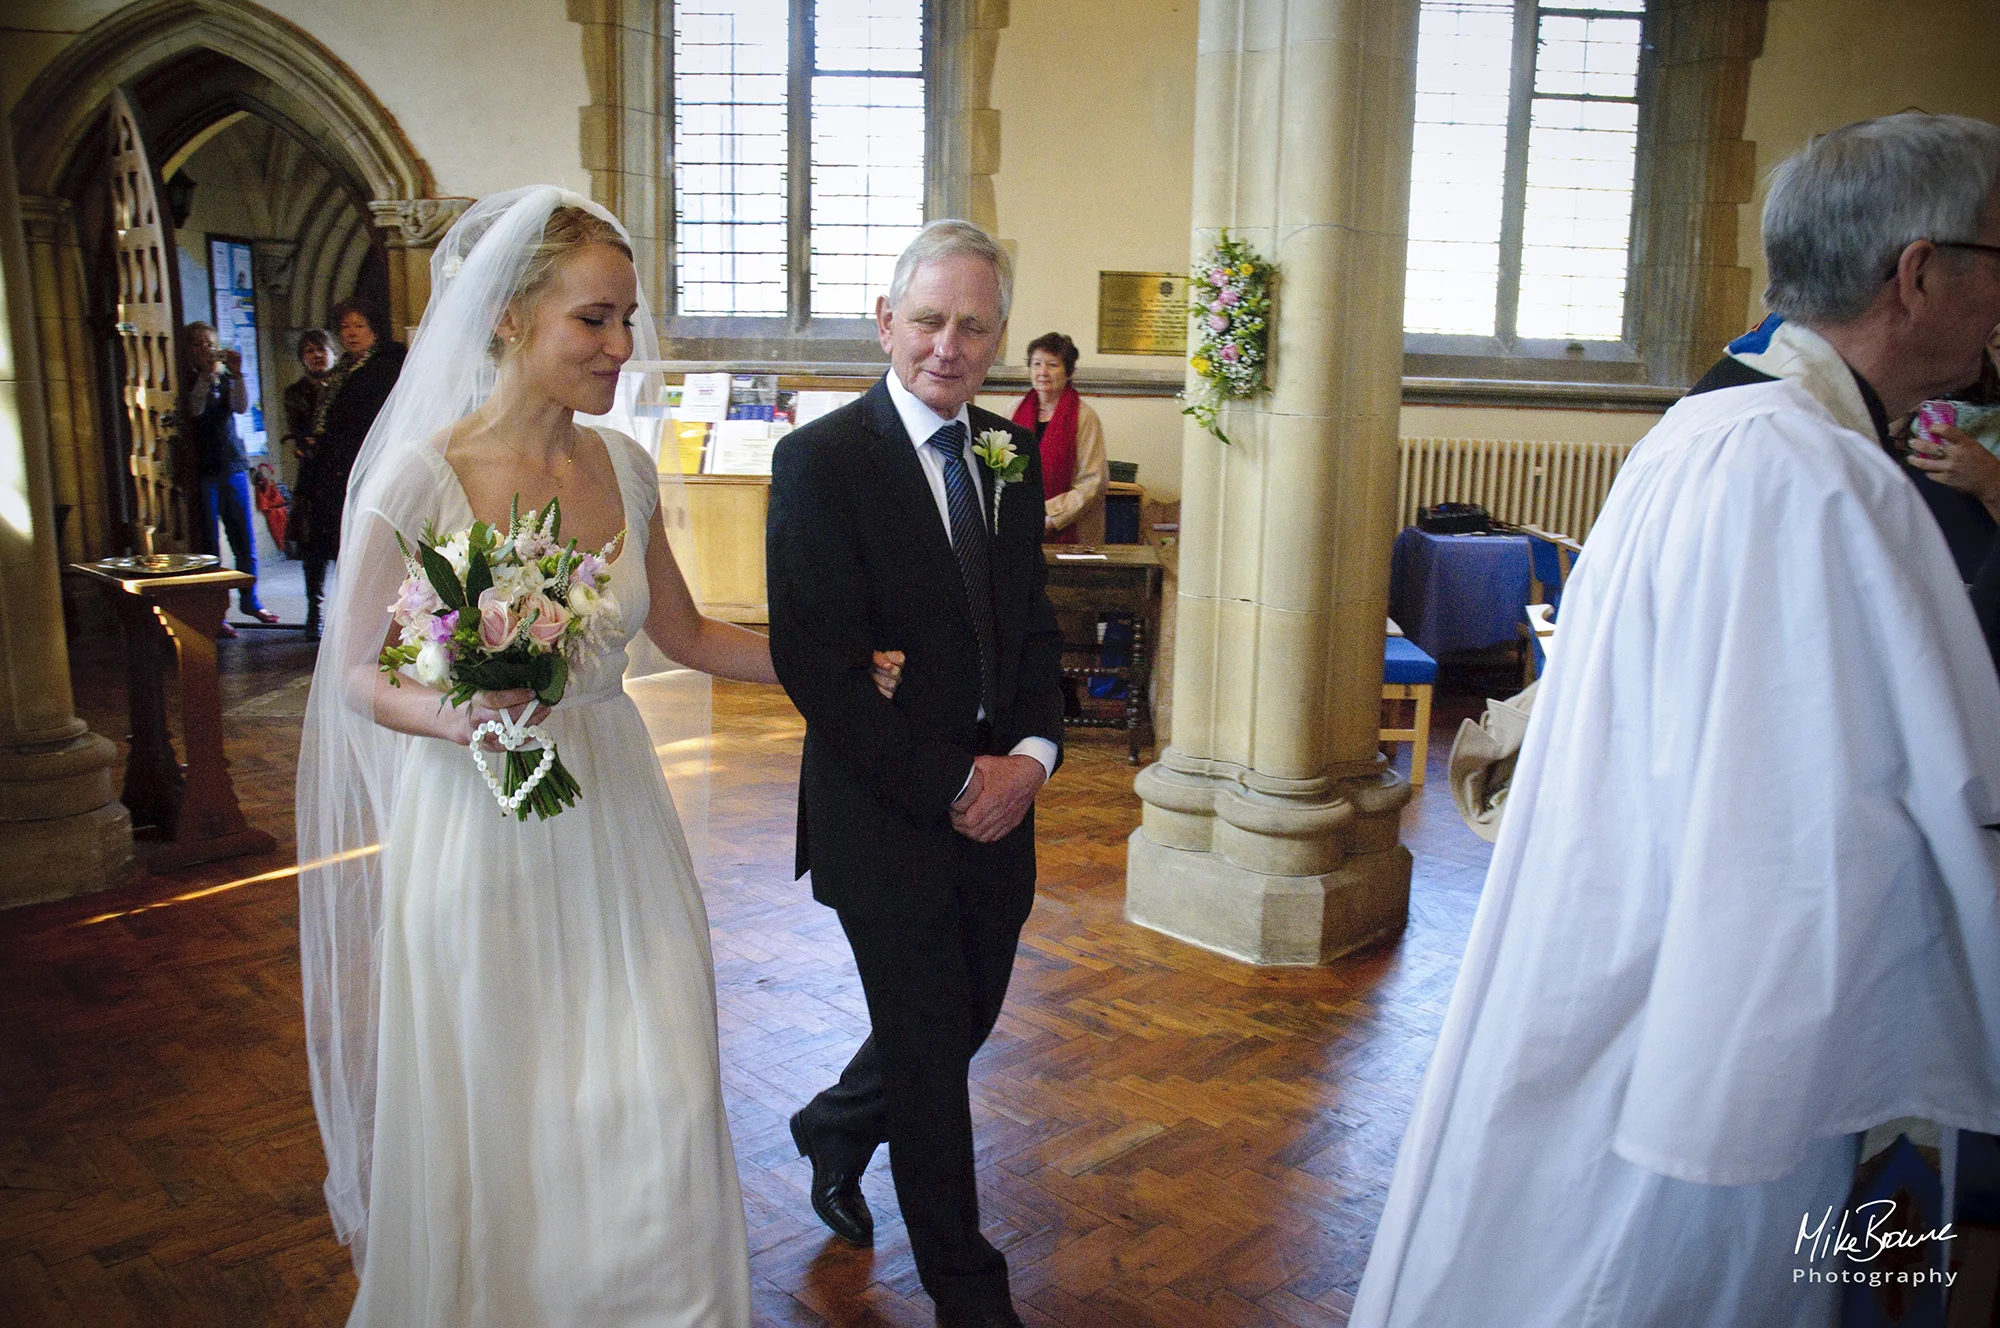 Bride and her father being led down the aisle by the vicar